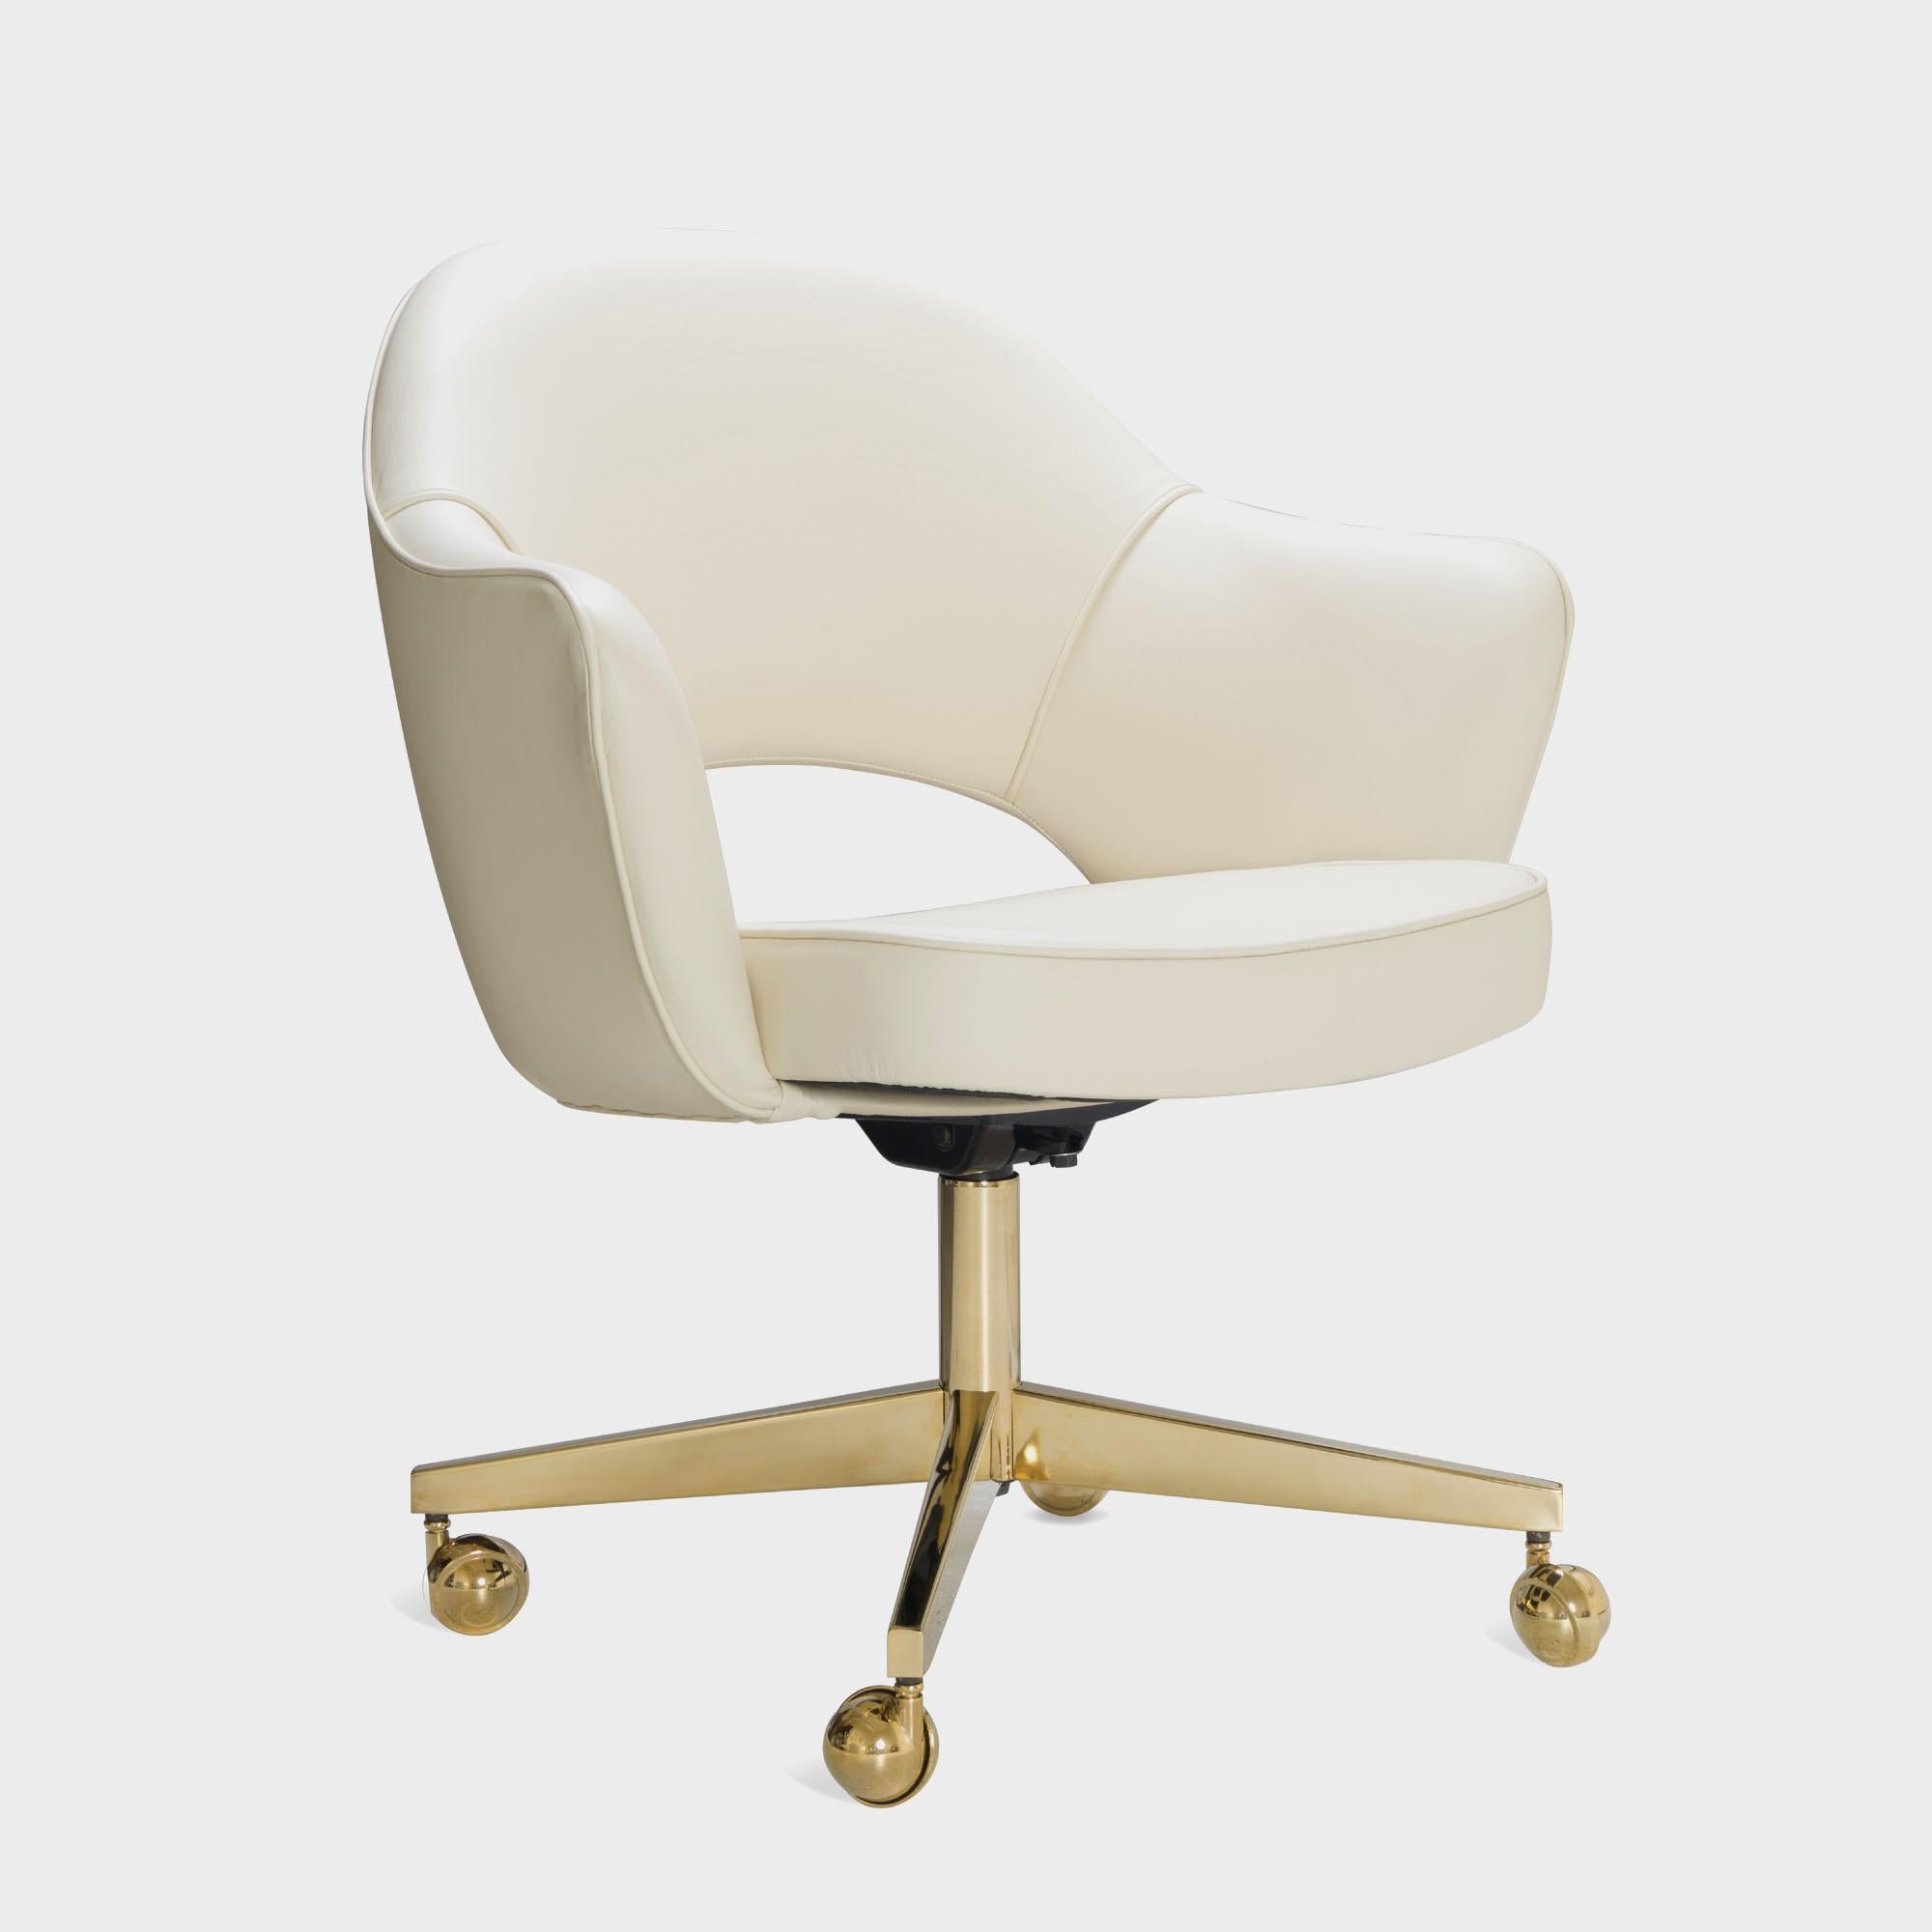 We've been restoring Saarinen executive chairs for years in every fabric one can imagine, right in our very own workroom. We’ve restored these vintage chairs using an elegant Italian Leather in the color Creme. Skilled craftsmen bring each chair